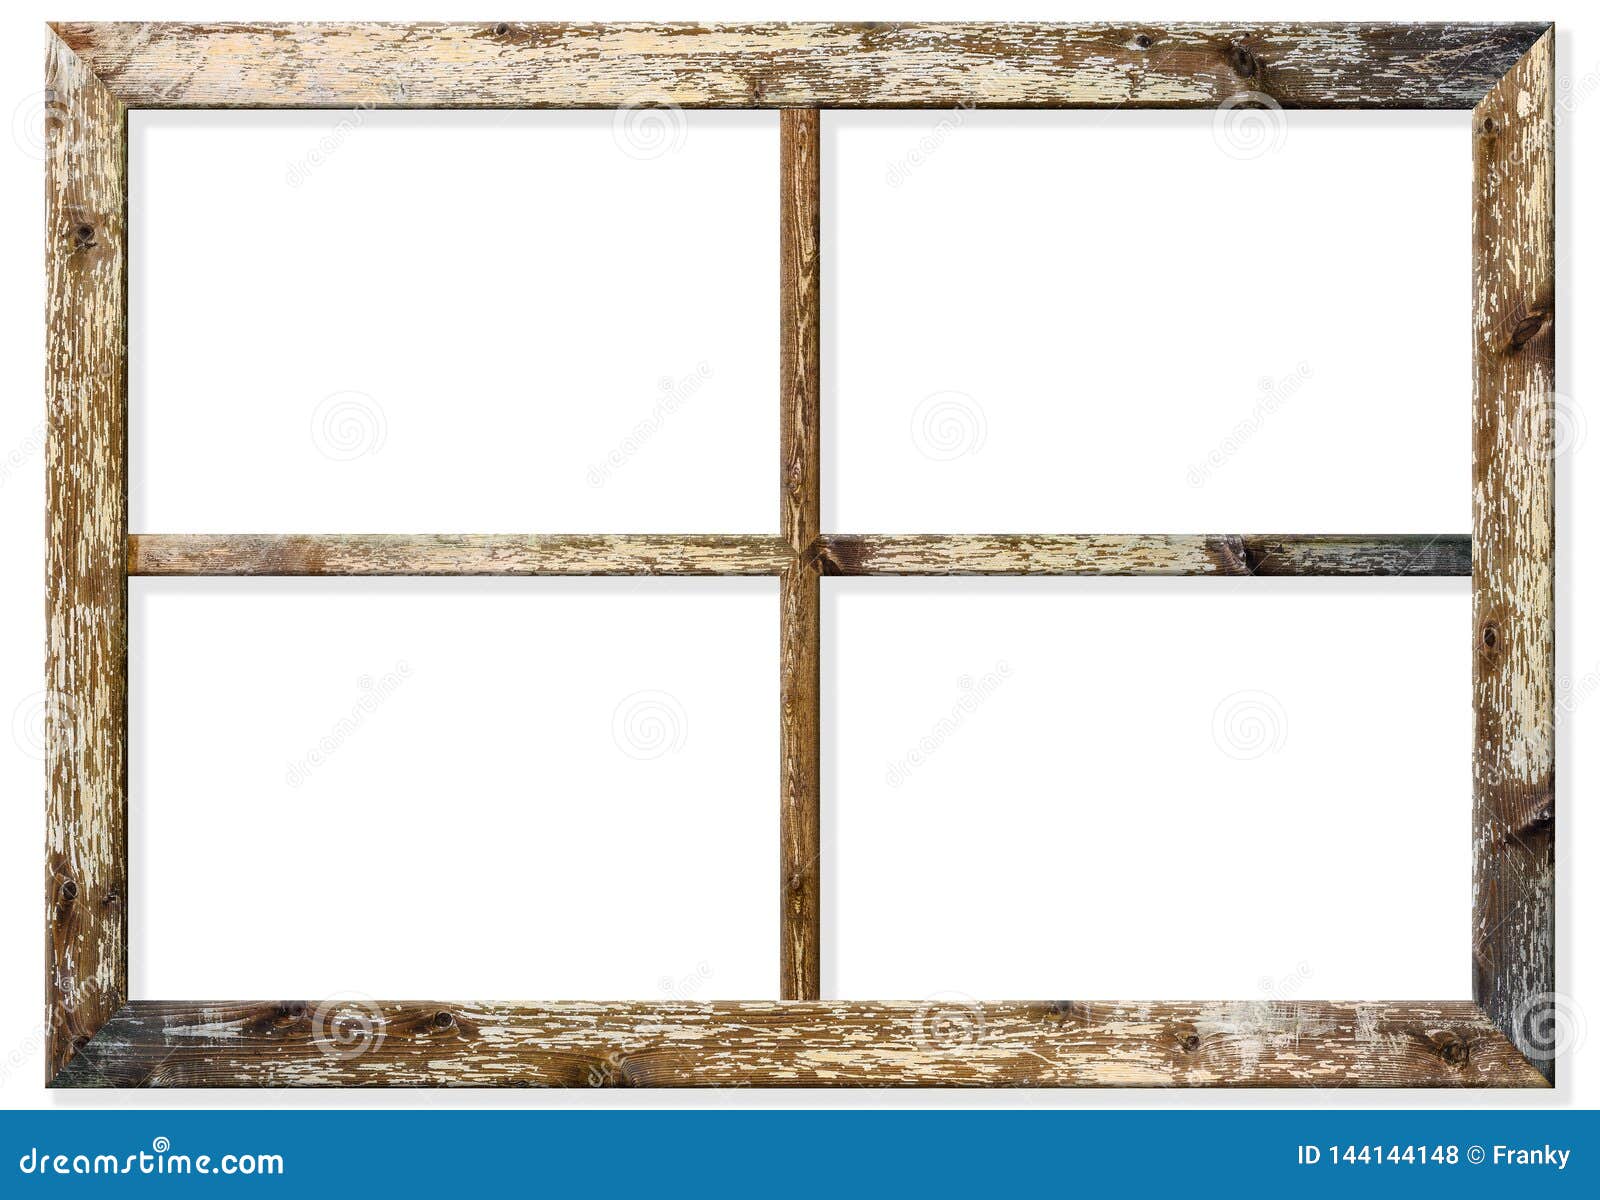 very aged wooden window frame with cracked paint on it, mounted on a grunge wall